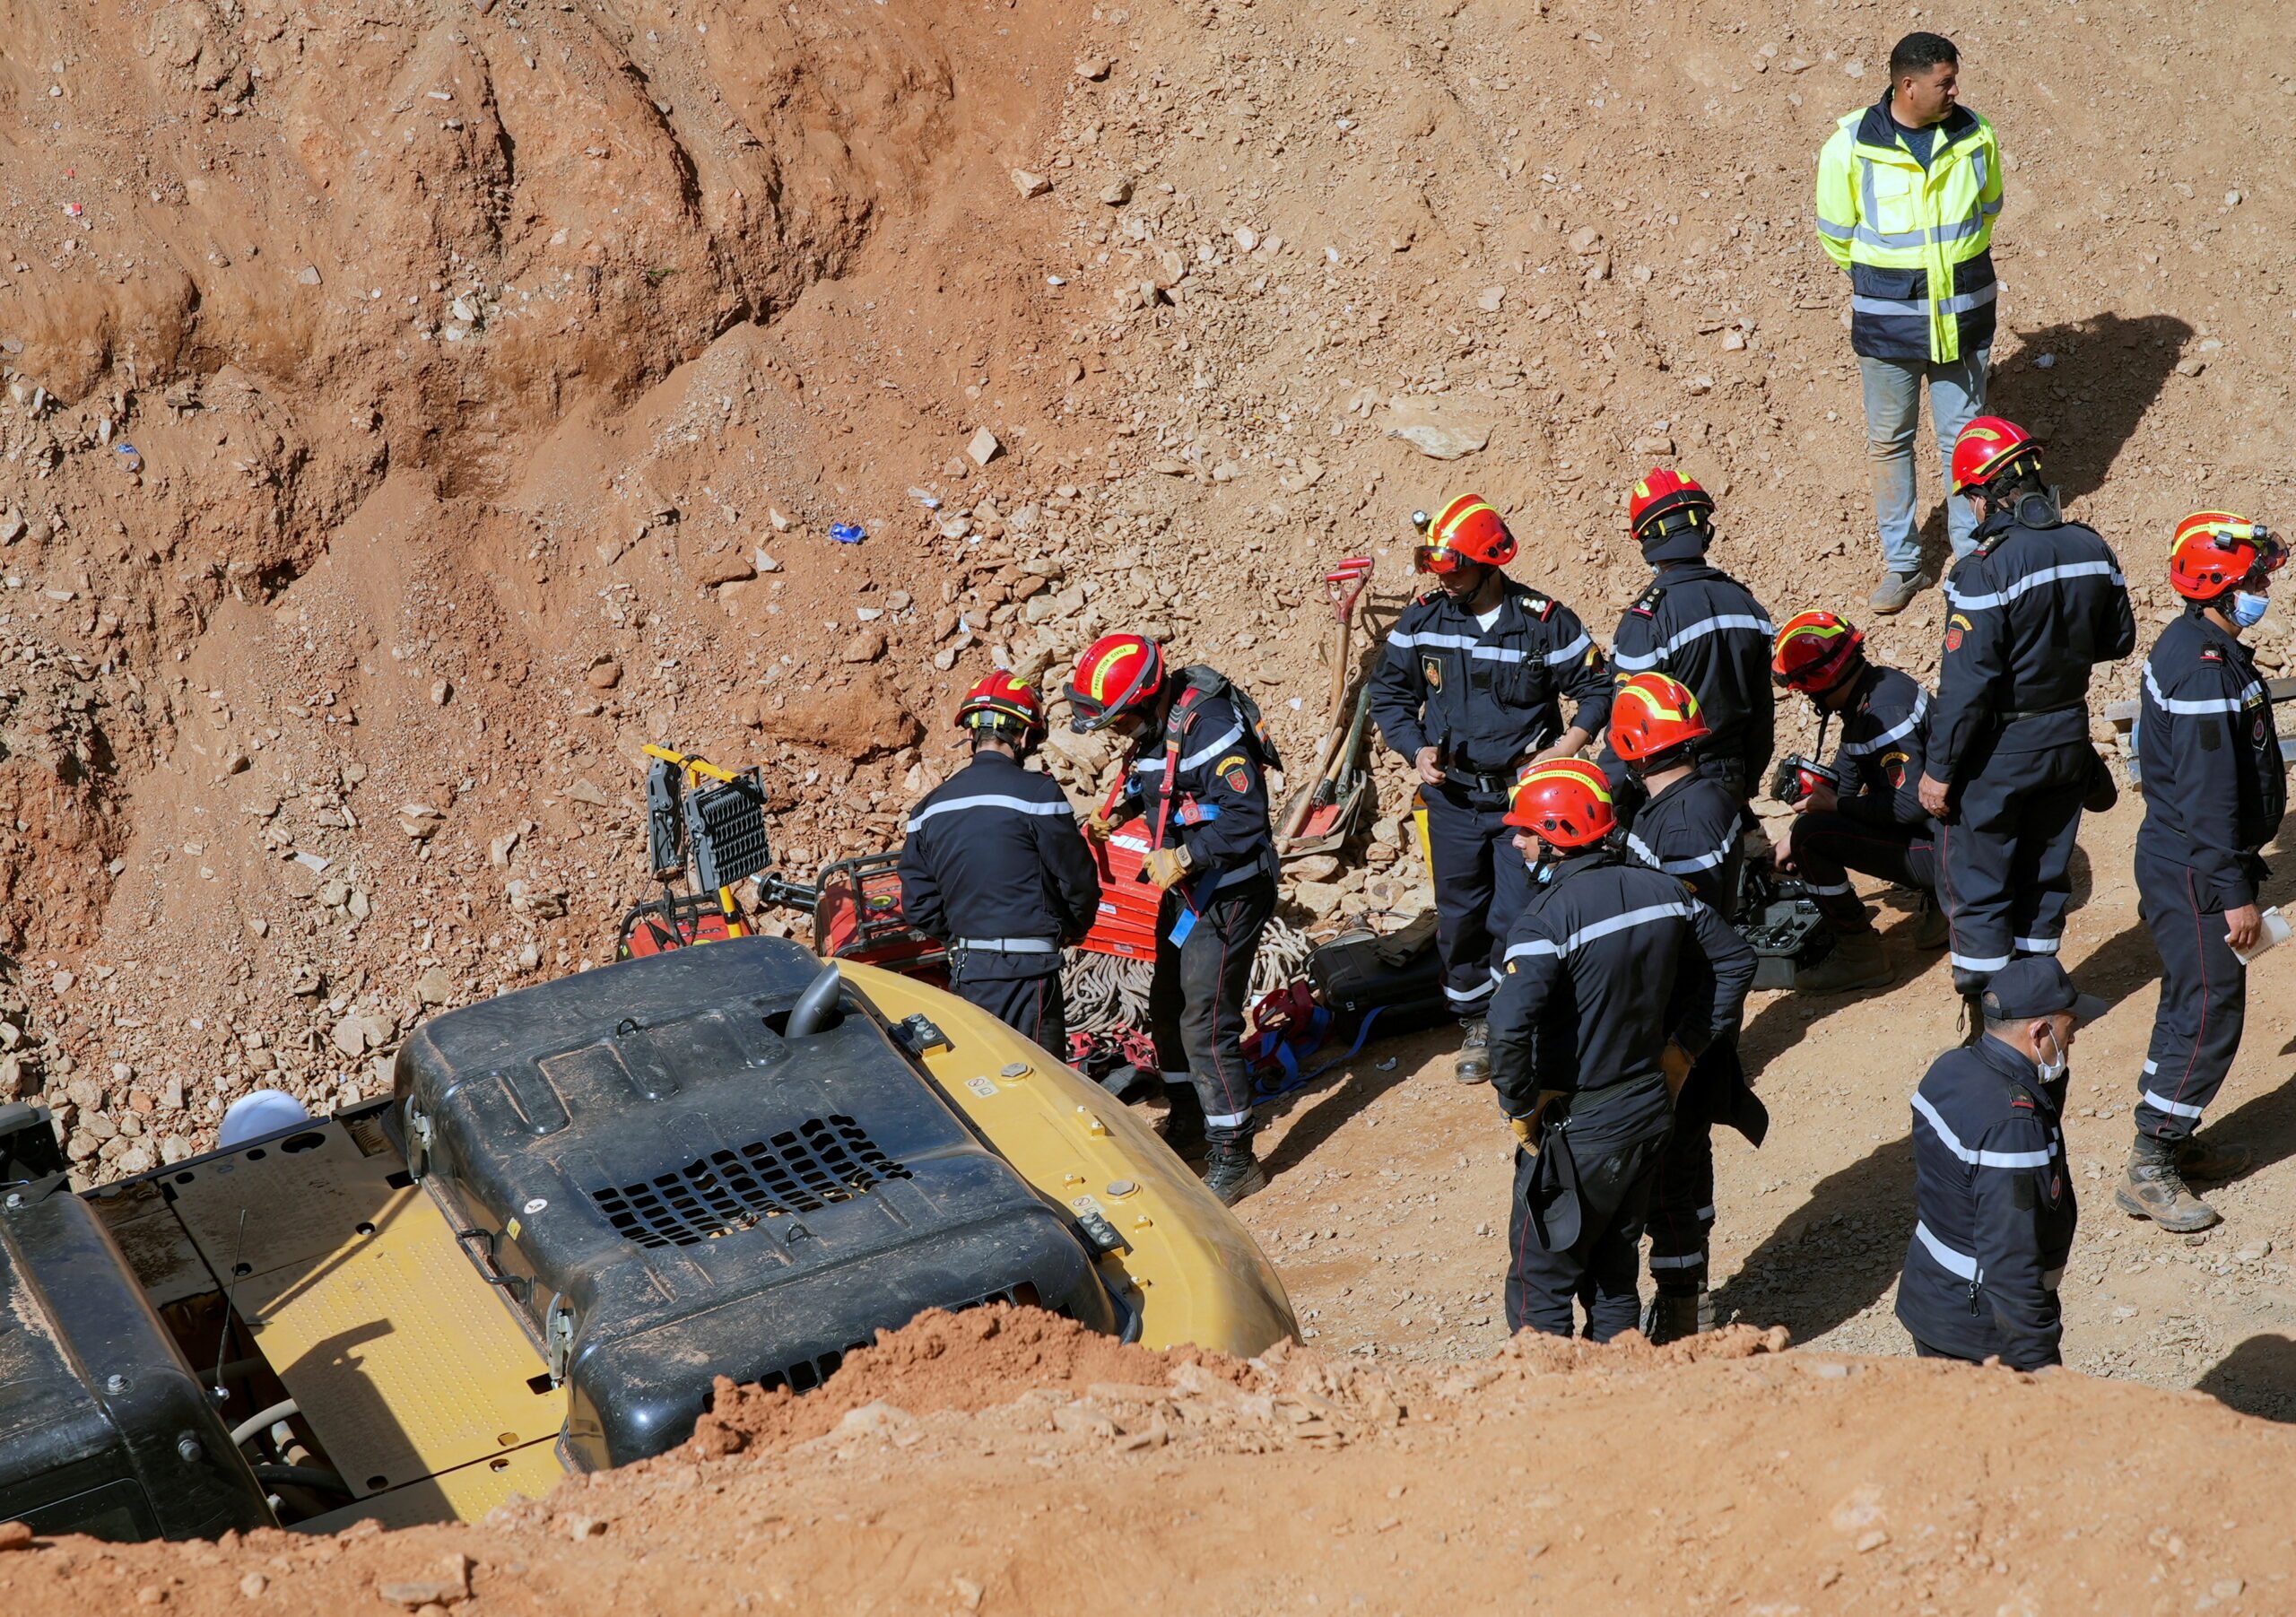 Moroccan rescuers get within meters of reaching child trapped in well